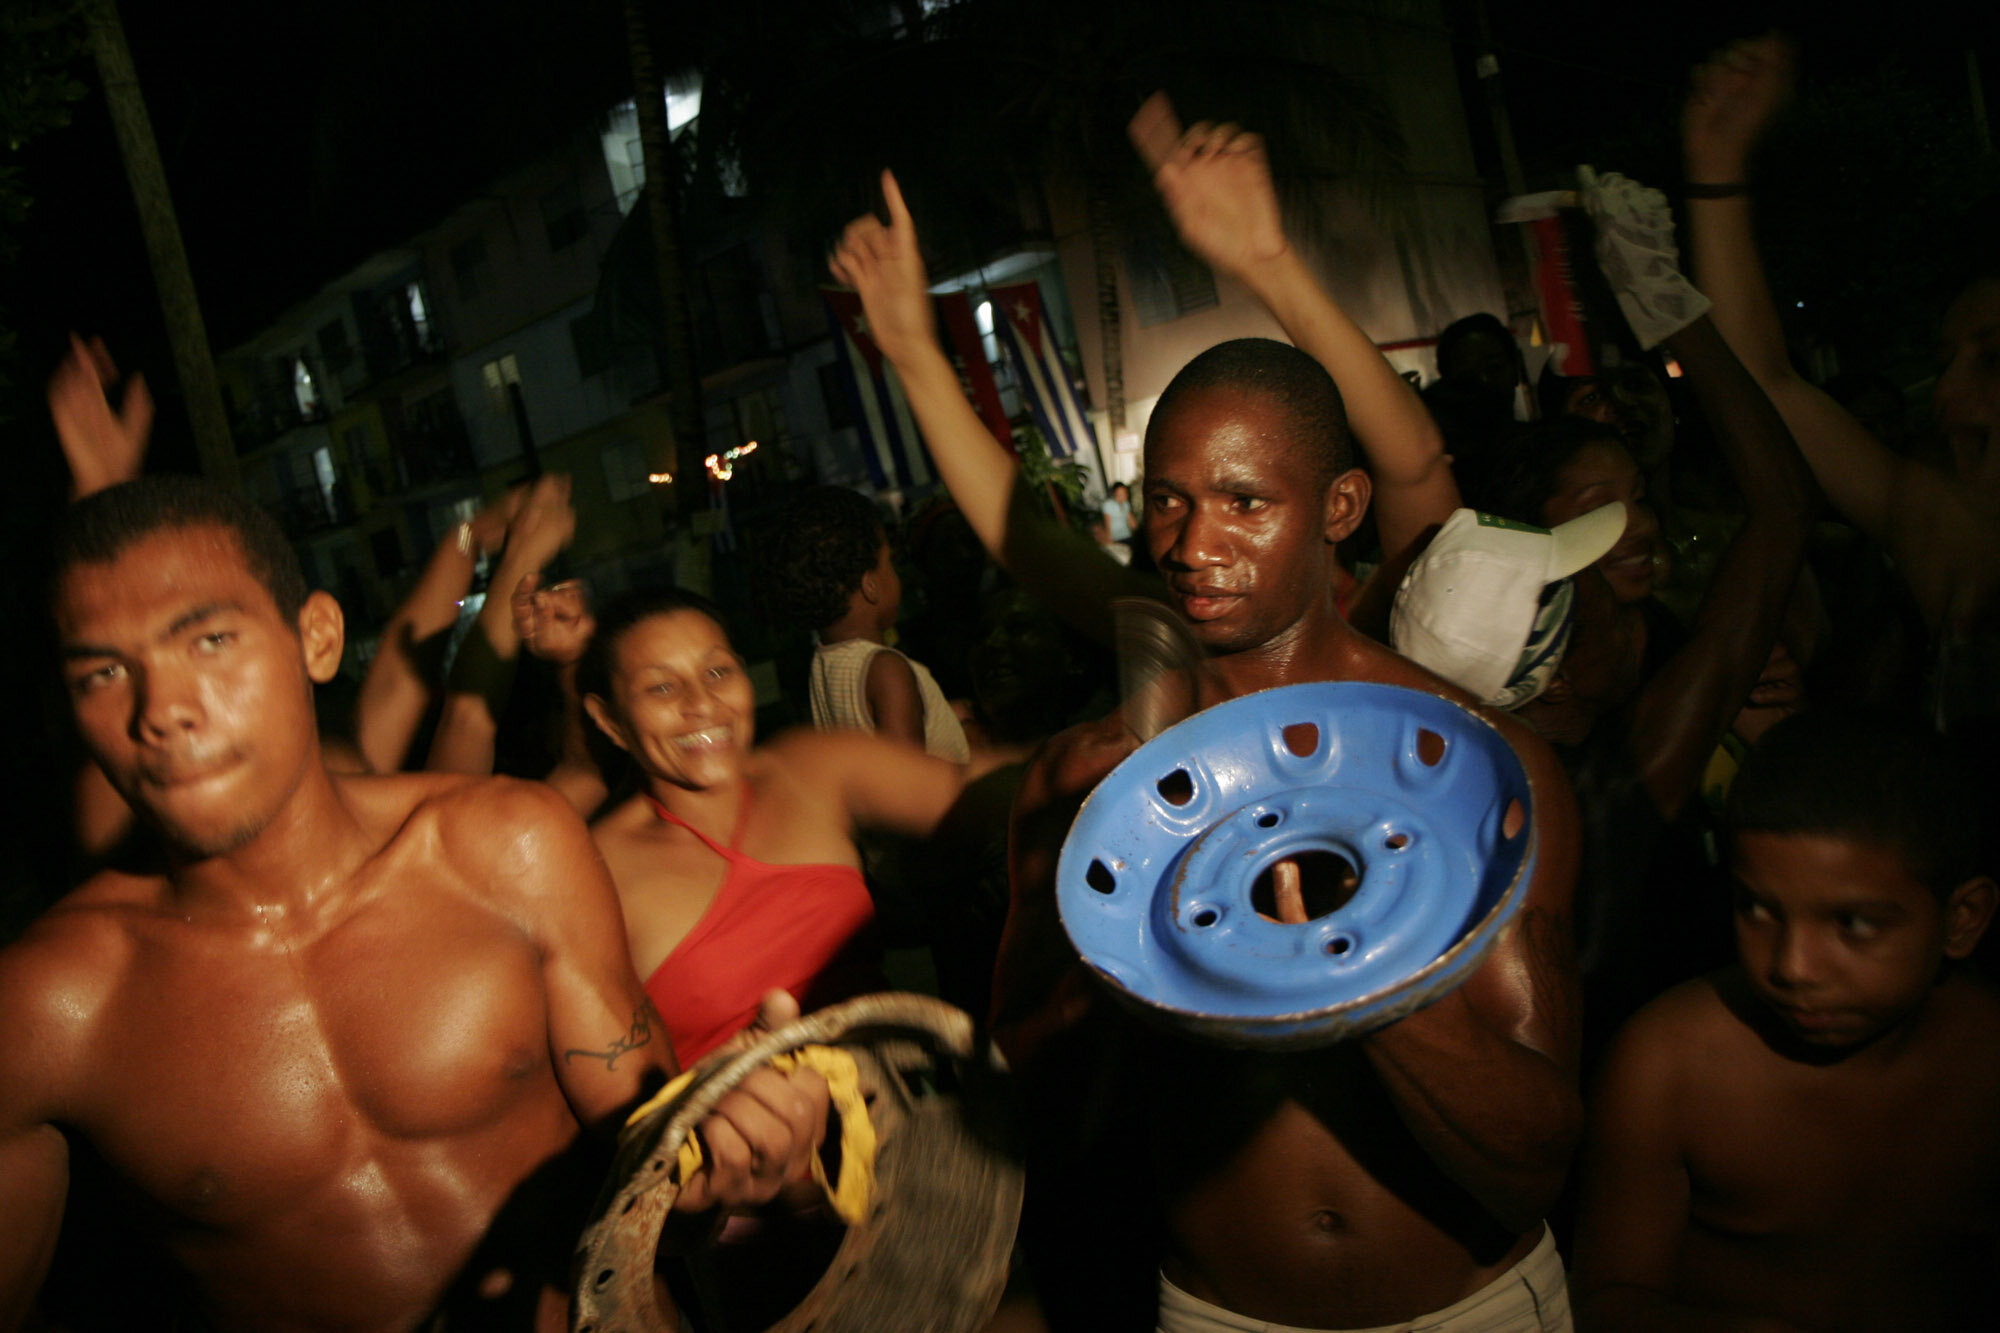  Cubans dance to a conga as celebrating a CDr anniversary, 2007. 